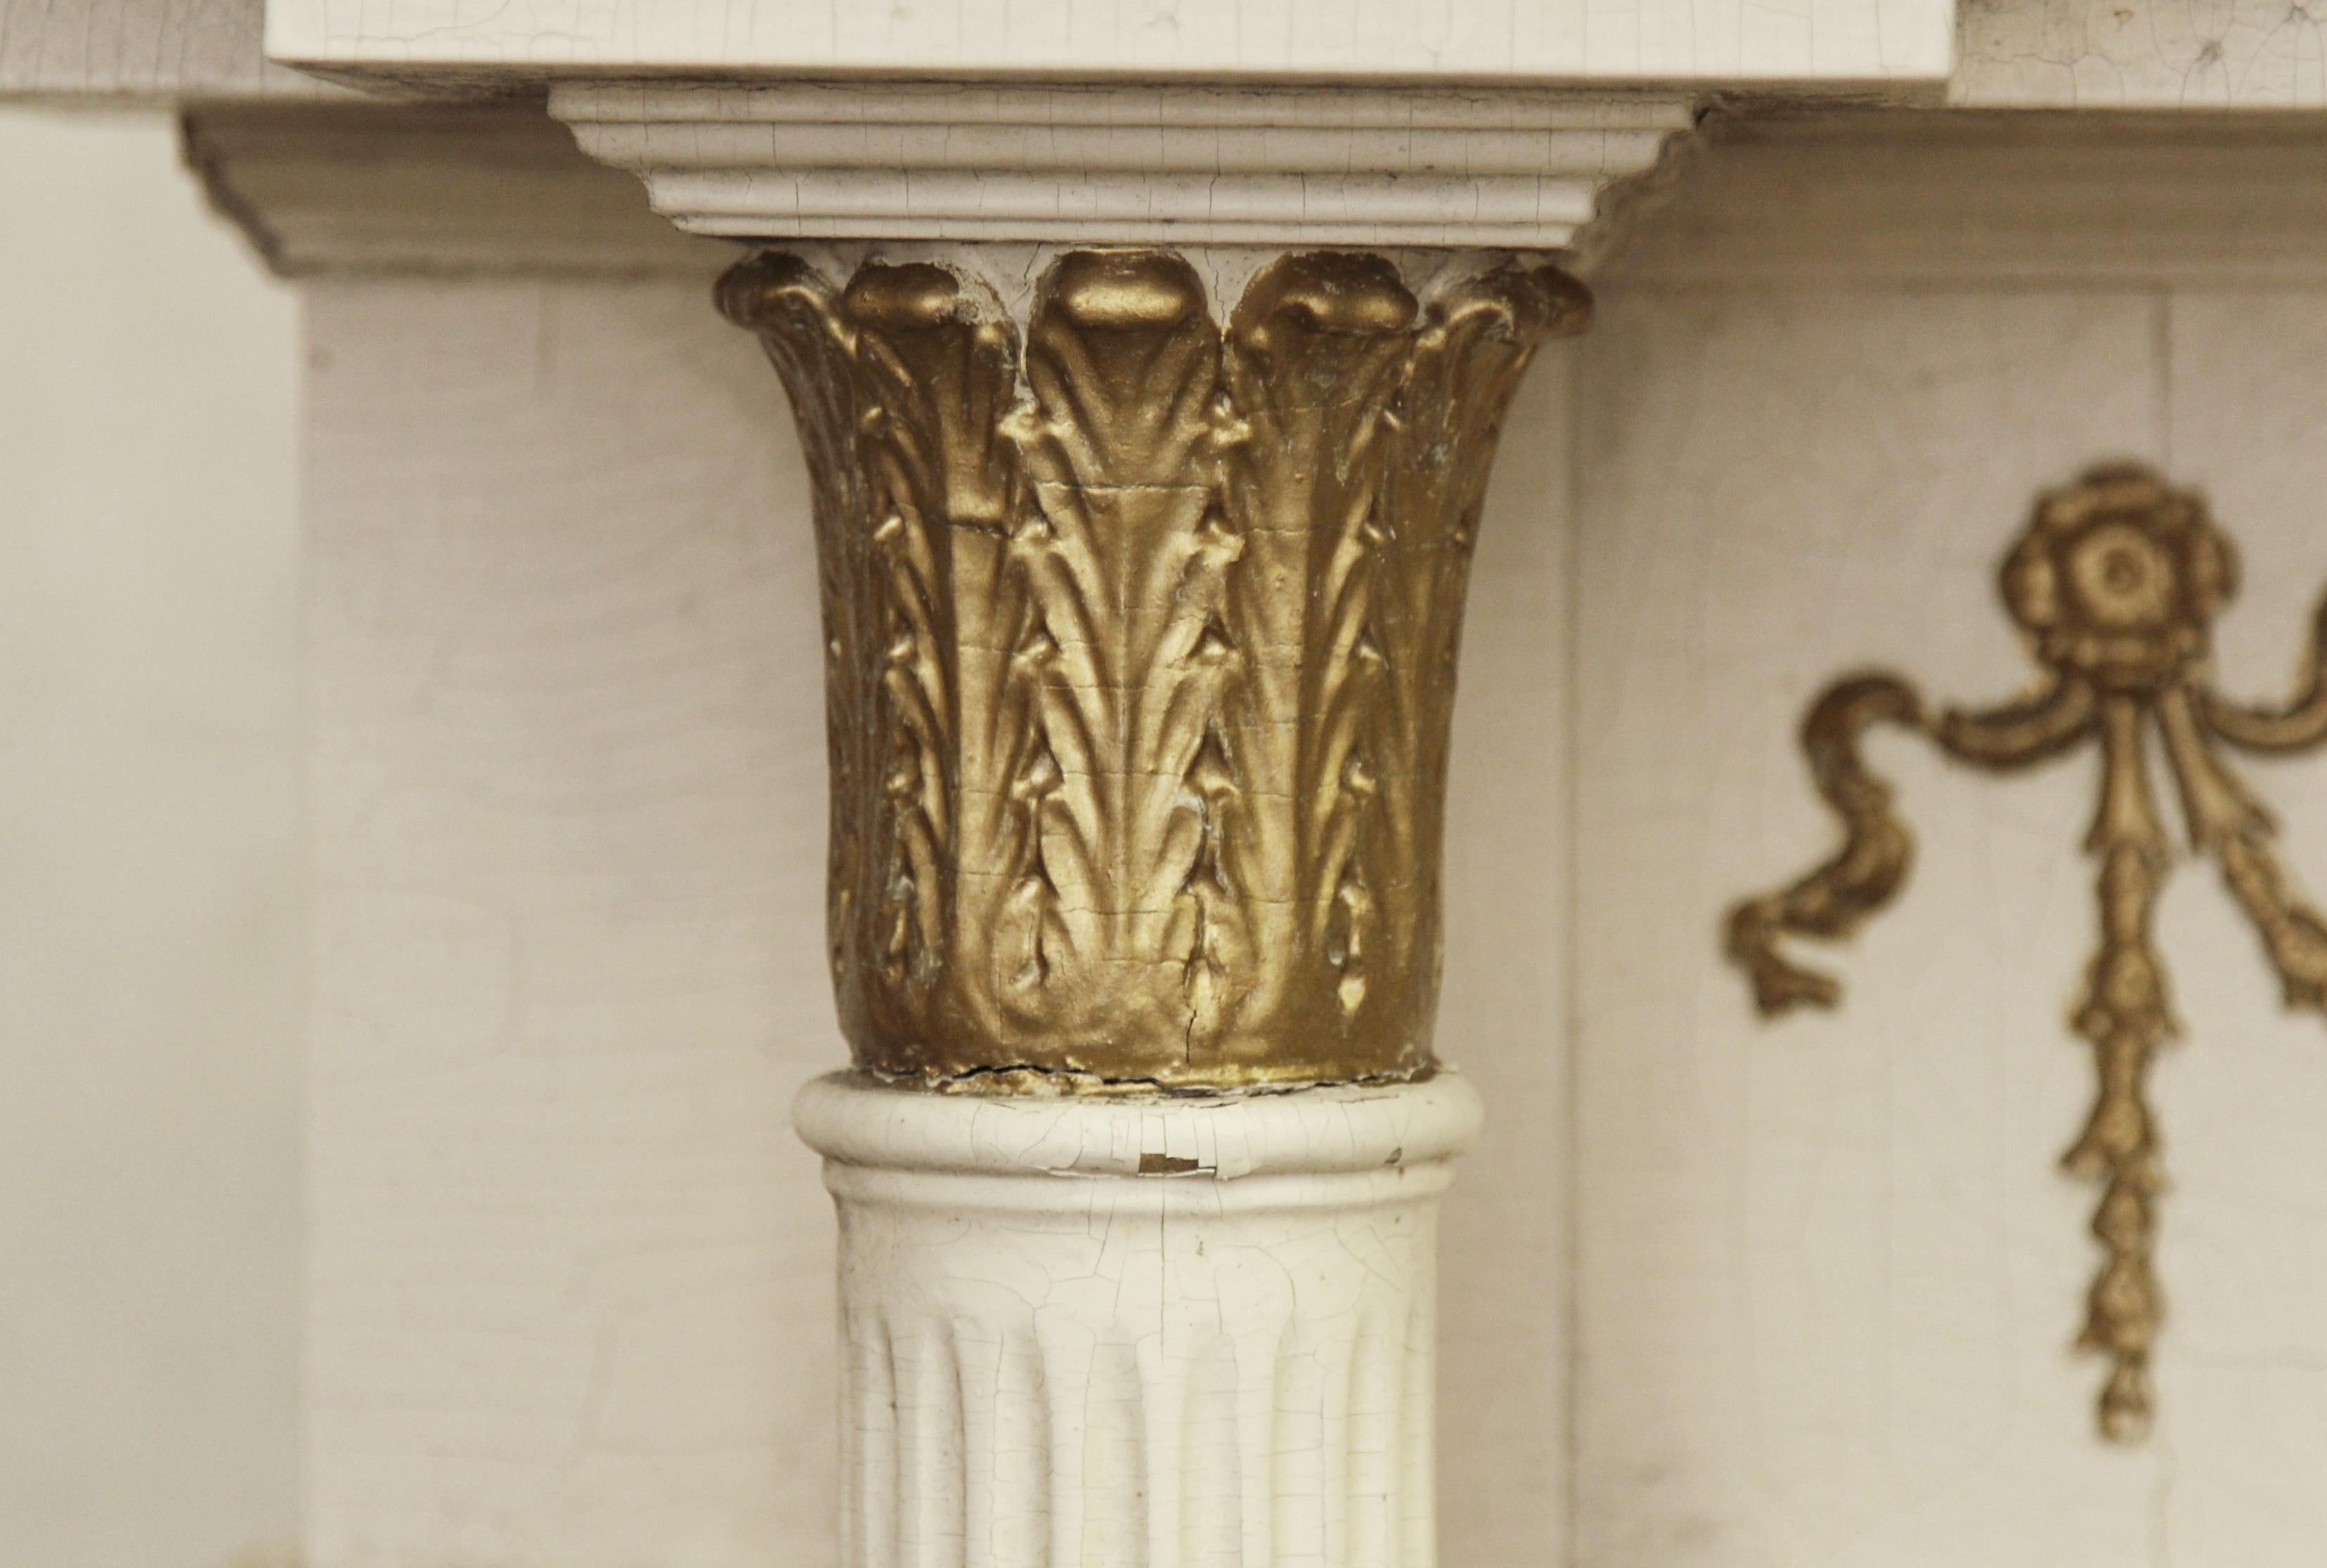 1905 White & Gold Wood Federal Style Mantel with Columns and Egg and Dart Design 1